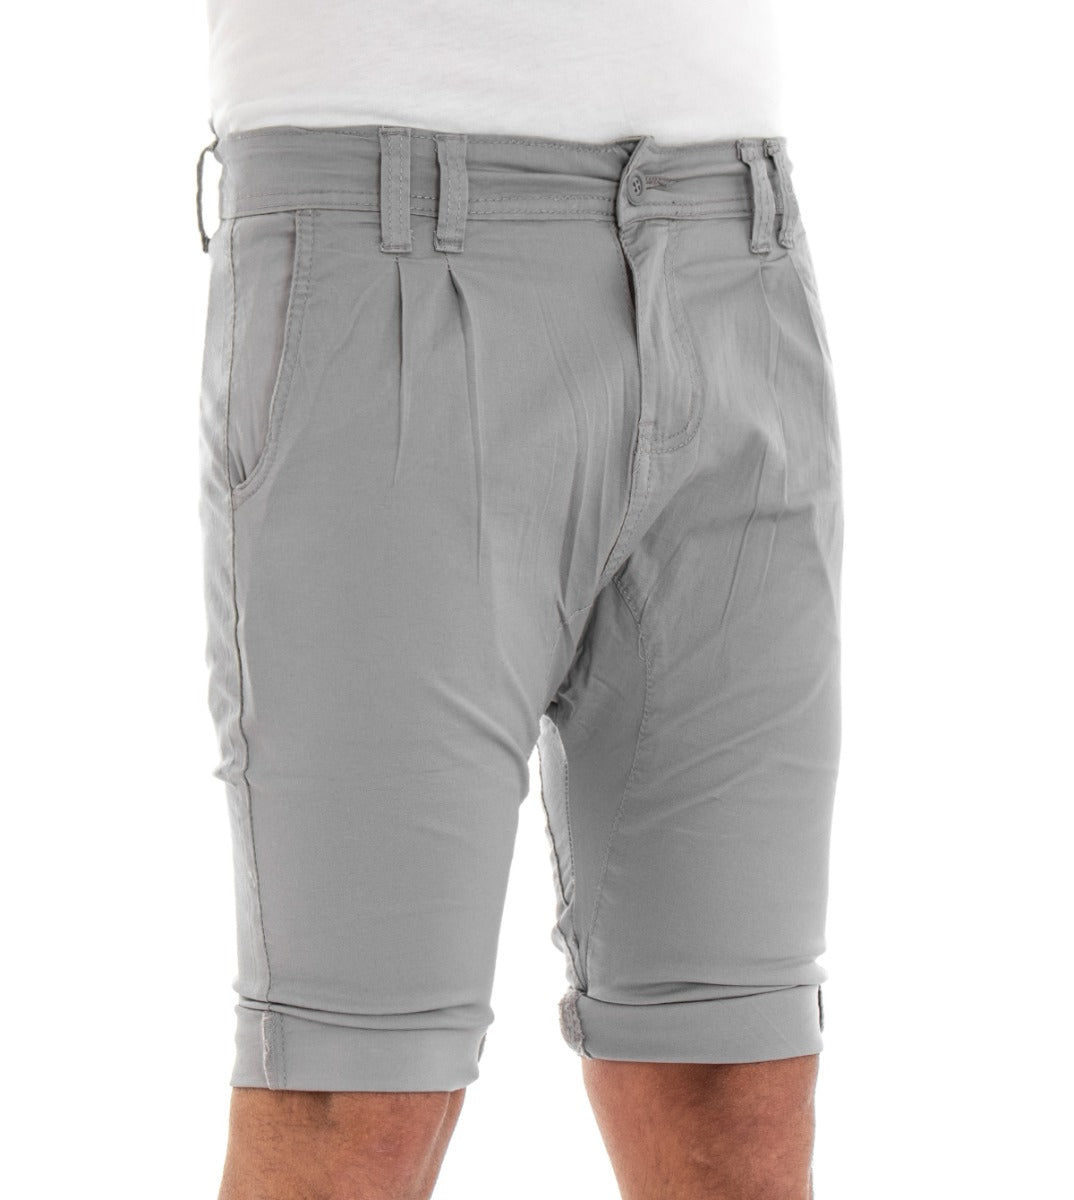 Bermuda Men's Short Shorts Gray Pence Solid Color Low Crotch GIOSAL-PC1306A